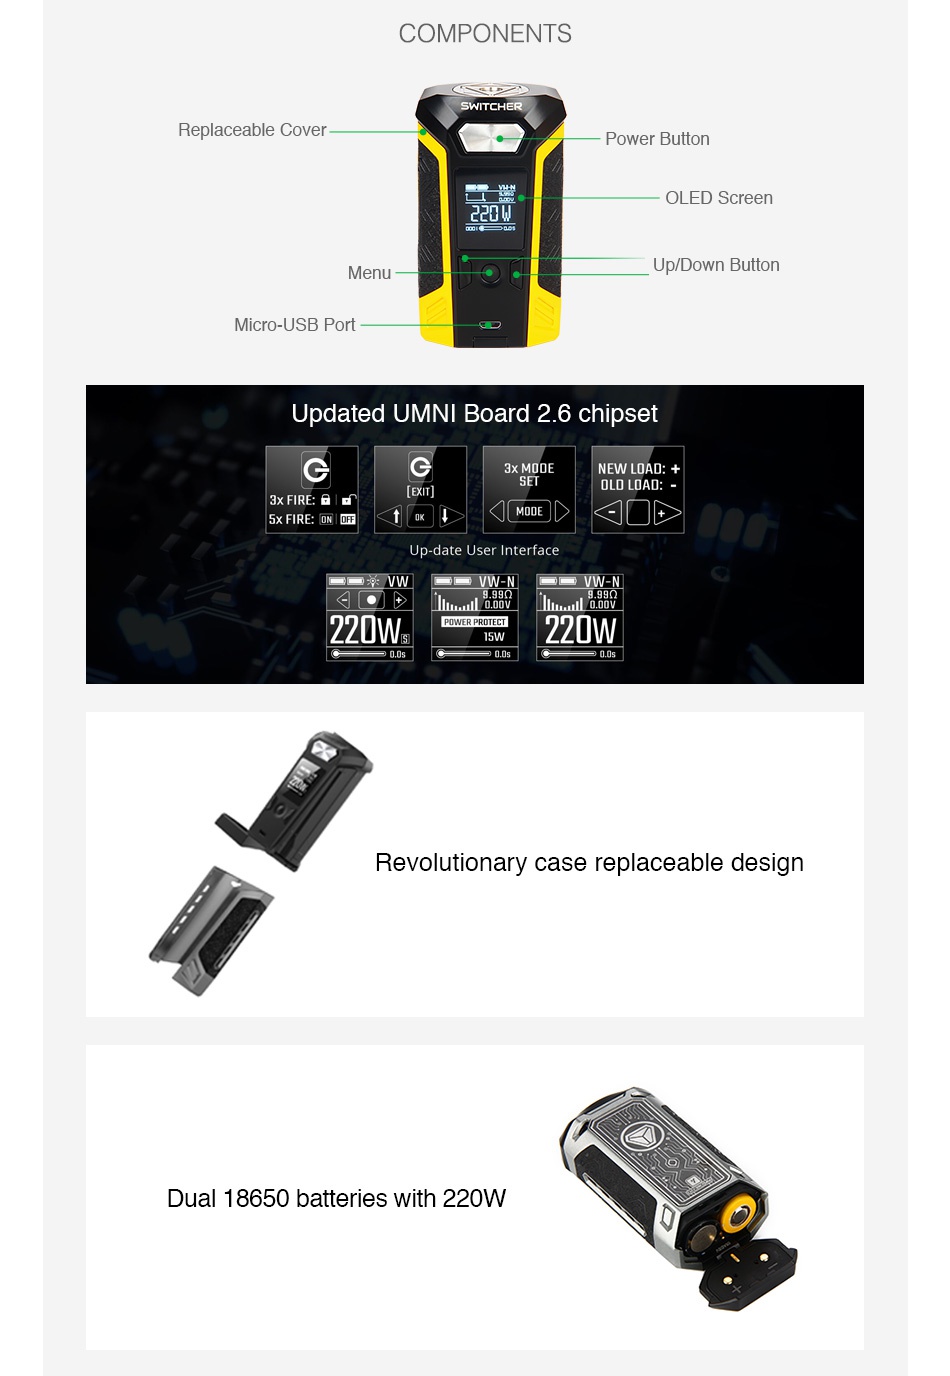 Vaporesso Switcher 220W TC Box MOD COMPONENTS Replaceable Cover Power button OLED Screen Jp Down Button Micro USB Port Updated UMNI Board 2 6 chipset 3X MODE NEW LOAD   m HRE faD Mmu VMIN 220W Revolutionary case replaceable design Dual 18650 batteries with 220W